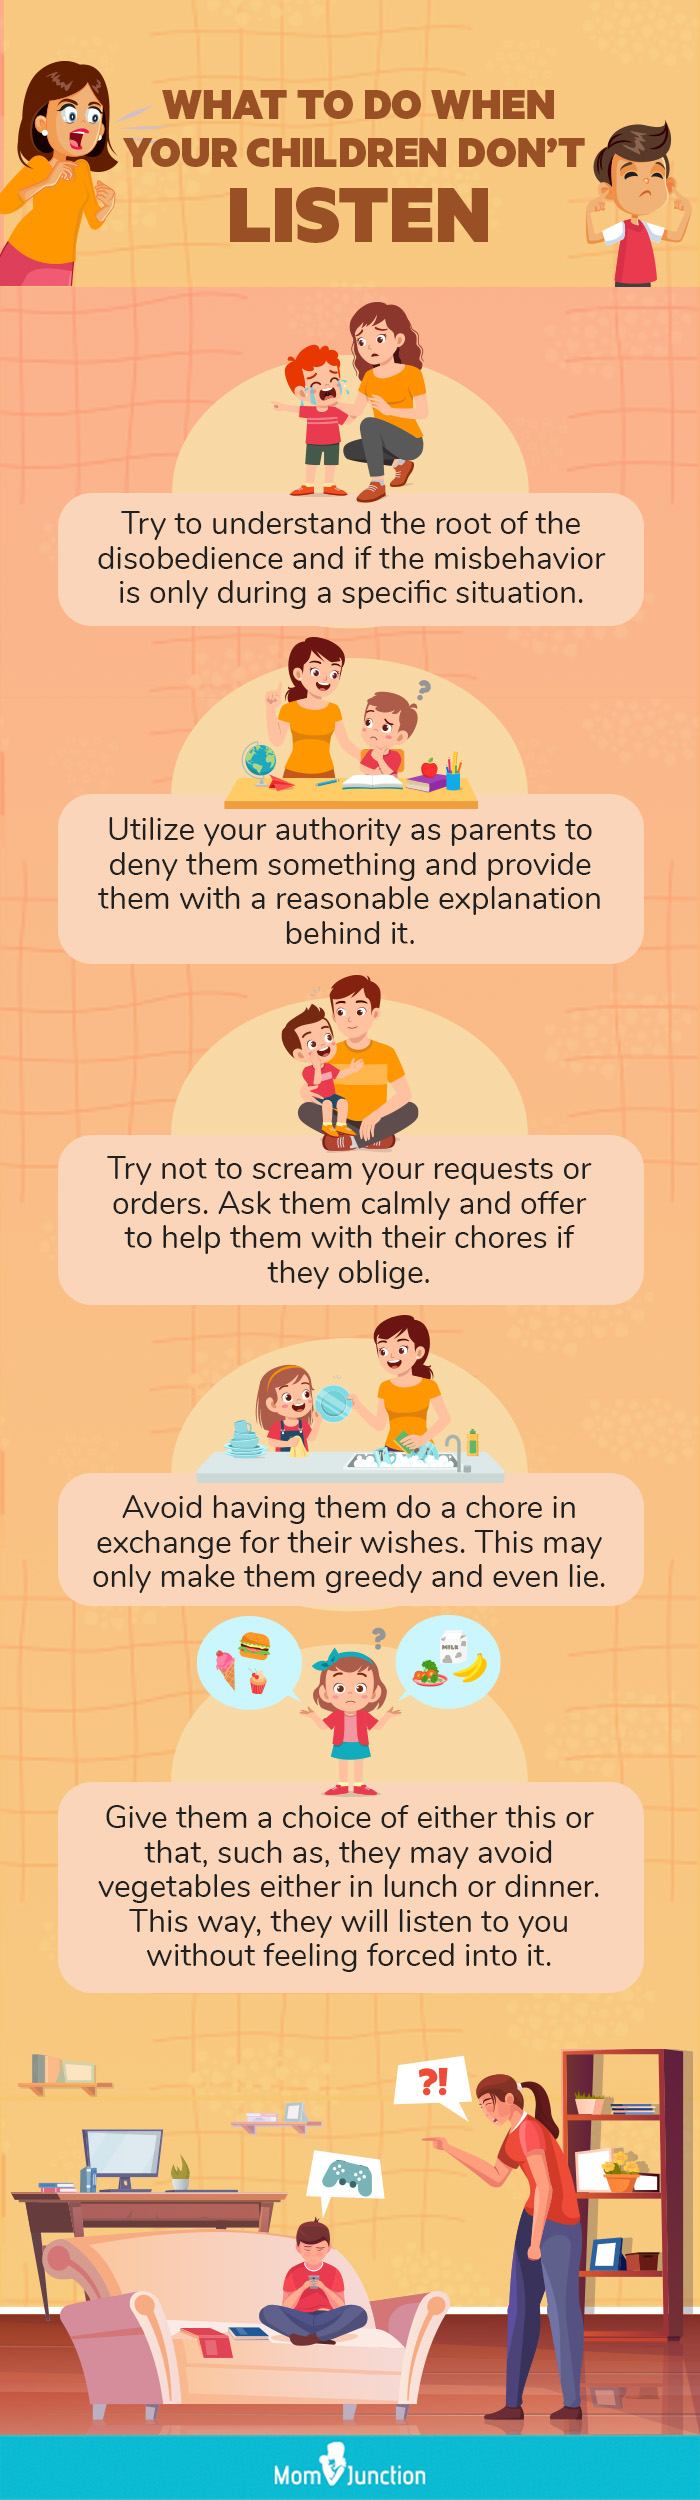 tips to discipline a disobedient child (infographic)